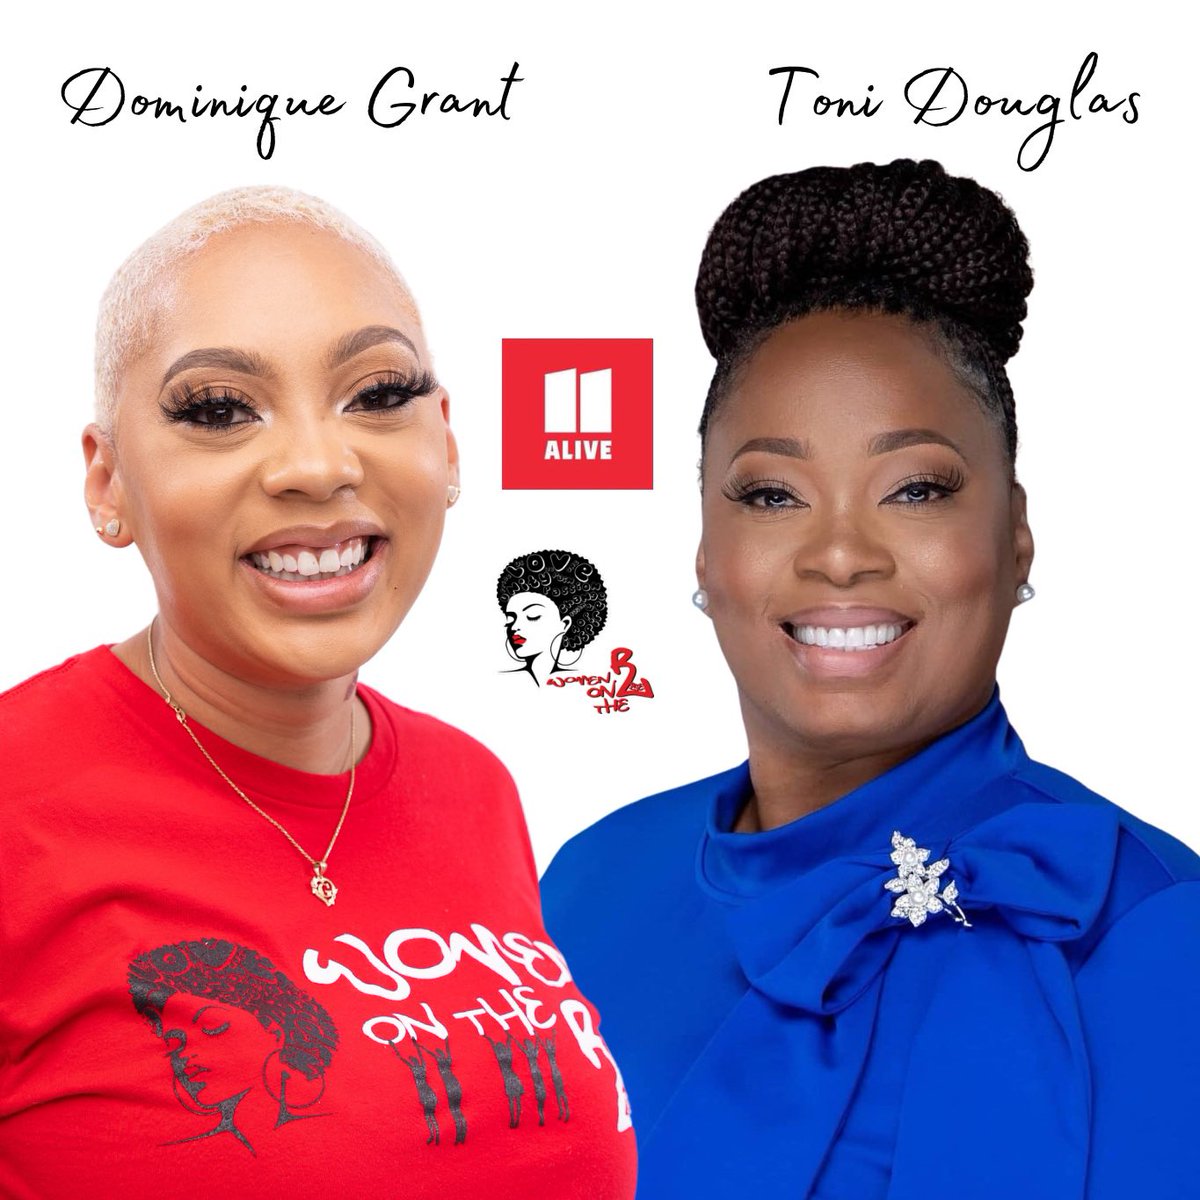 Women on the Rise Campaign & Community Organizer, Dominique Grant will be on Atlanta & Co with her mother Roberta (Toni) Douglas, Vice President of State Strategy & Reentry at Legal Action Center, to discuss working in Criminal Justice Reform. Tune in Thursday on 11Alive at 11am